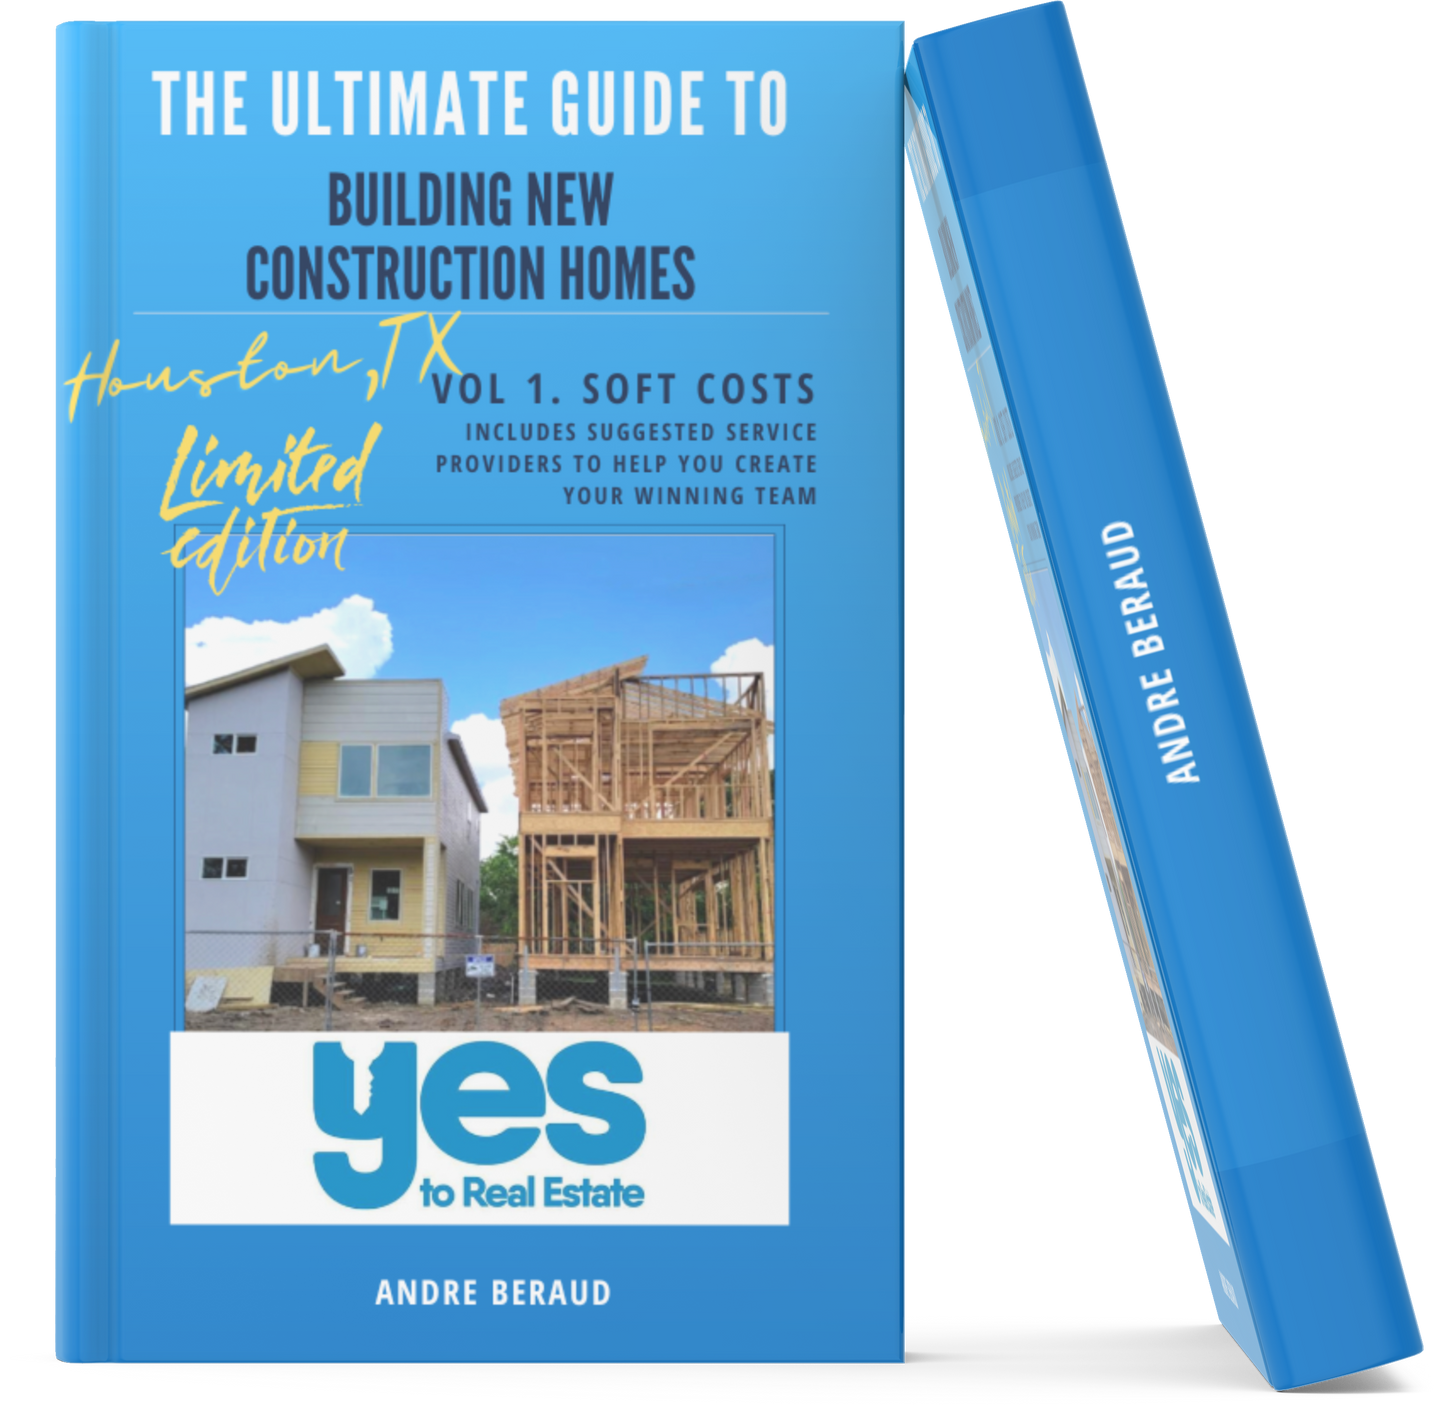 The Ultimate Guide to Building New Construction Homes Vol. 1 Soft Costs (Houston, TX Limited Edition)